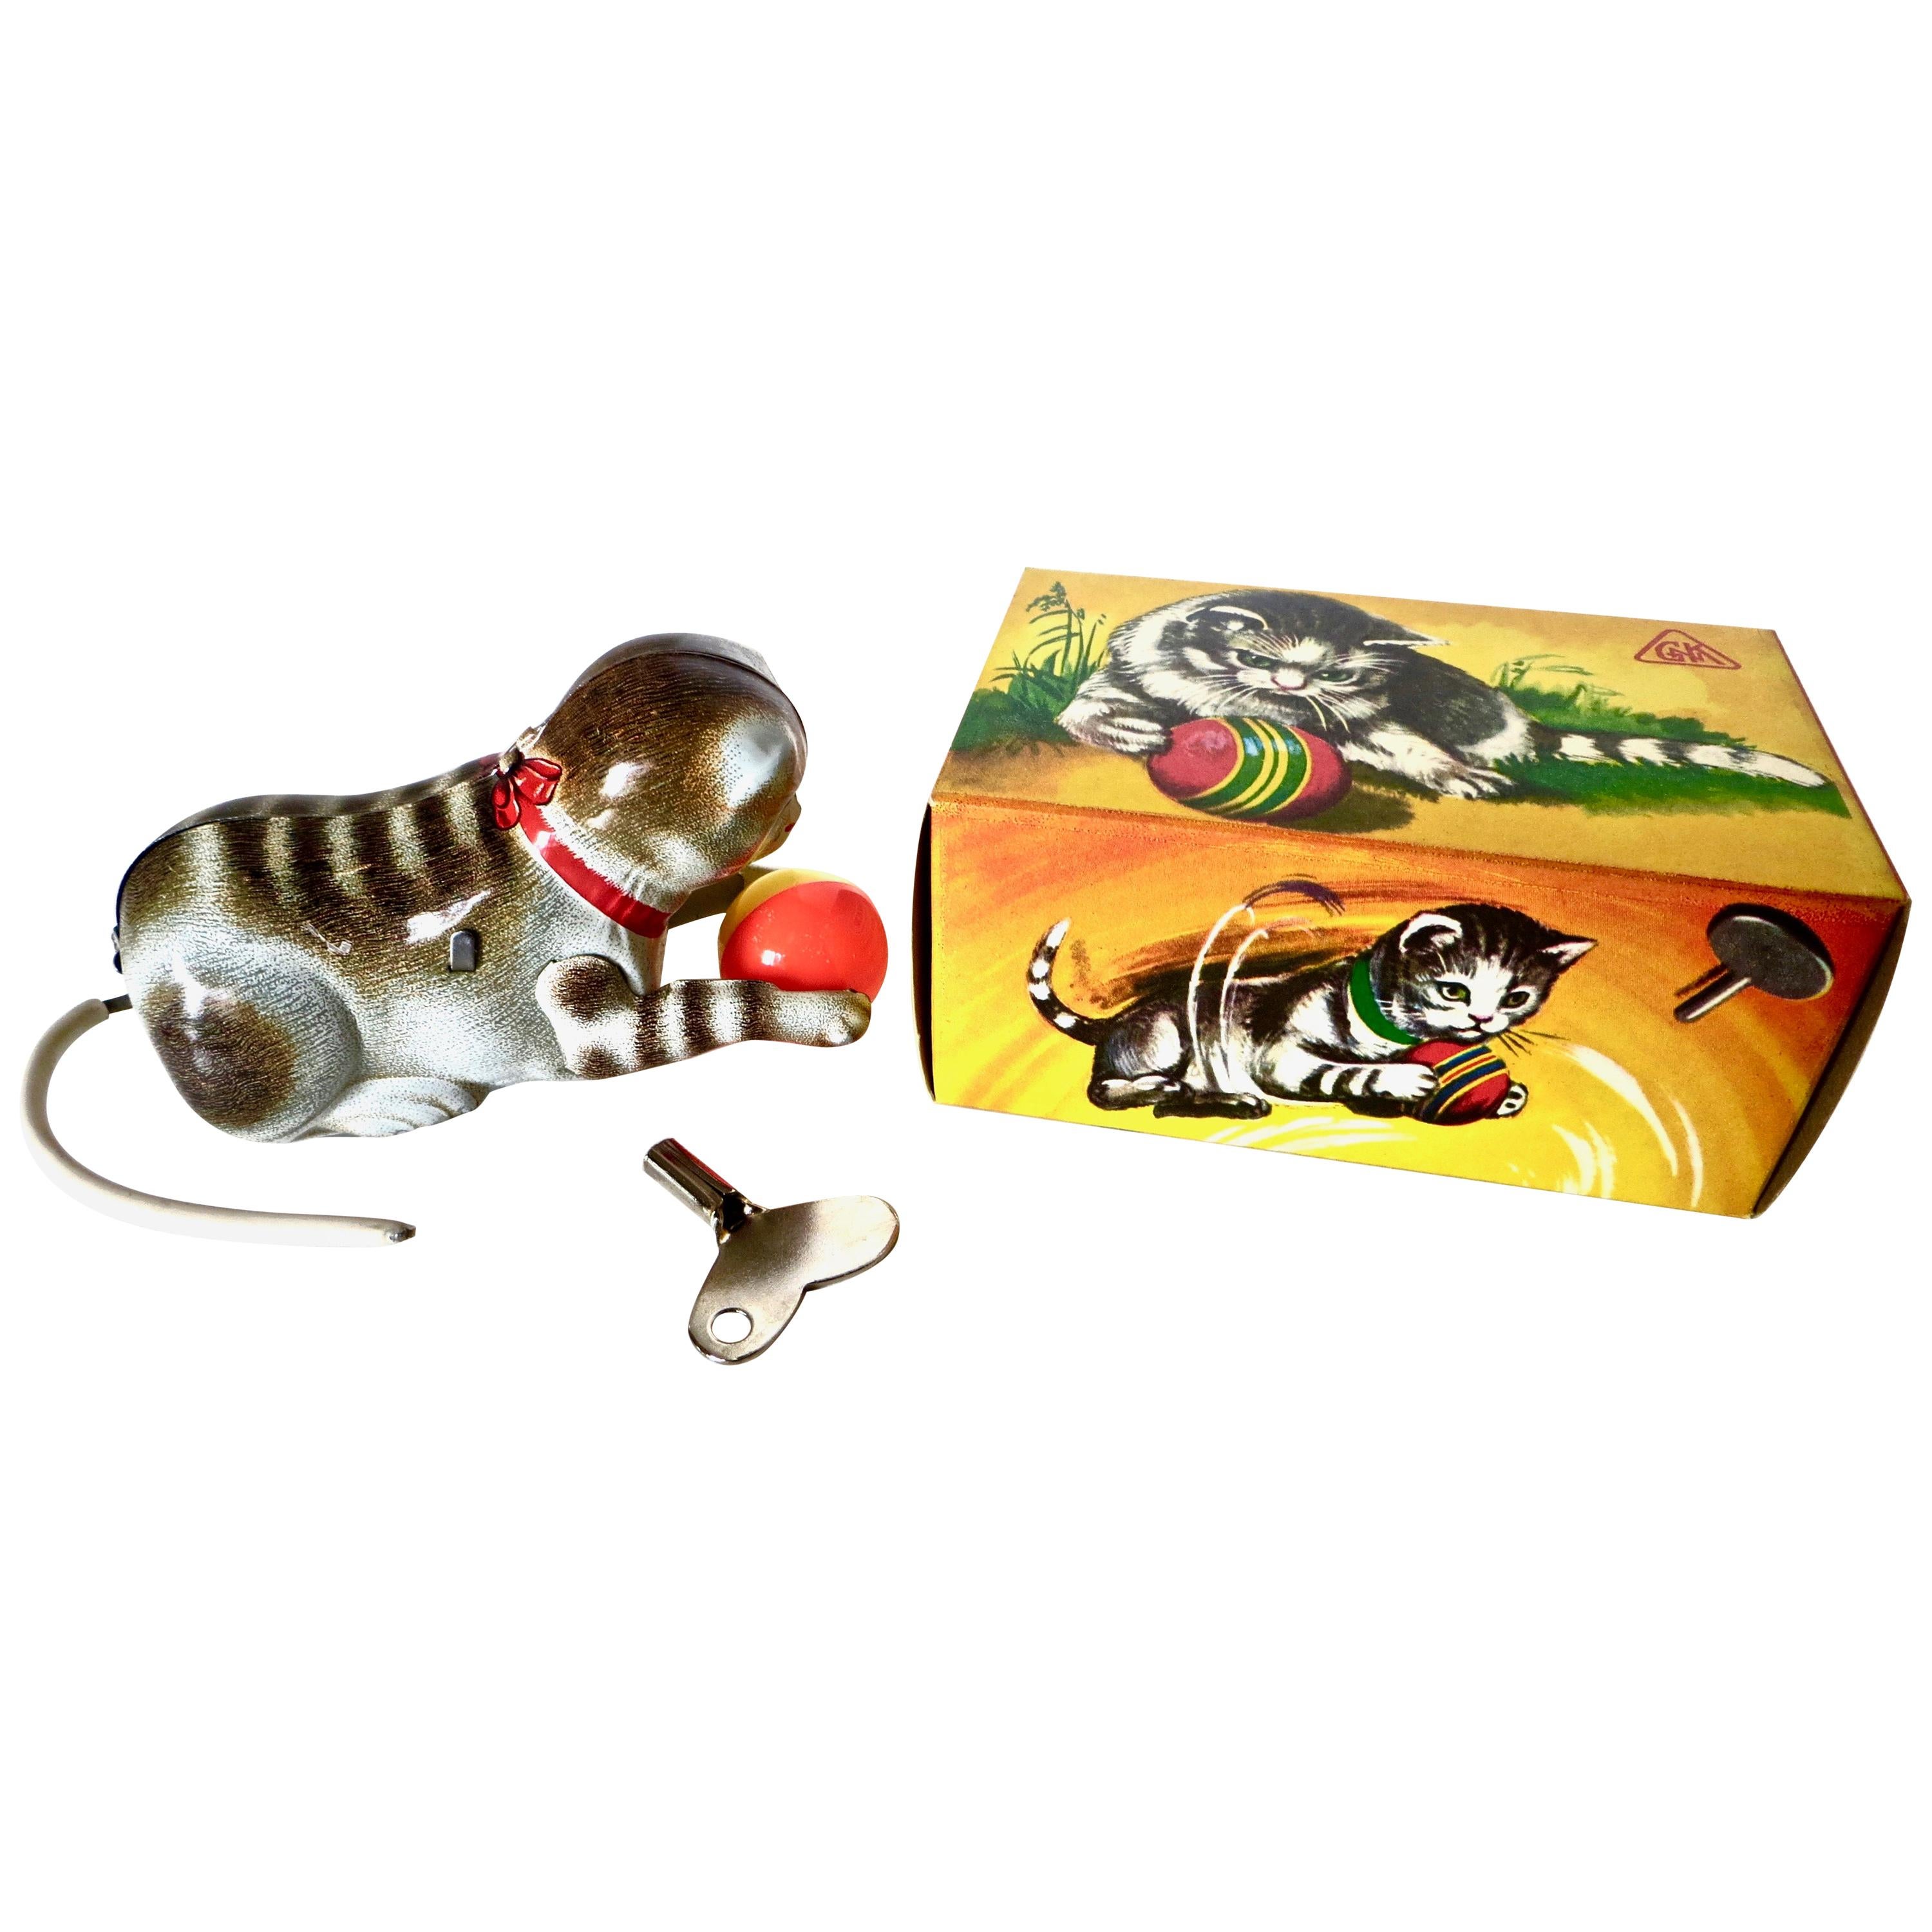 "Roll Over Cat" Mechanical Wind-Up Toy by Kohler, Germany 'U.S. Zone' circa 1950